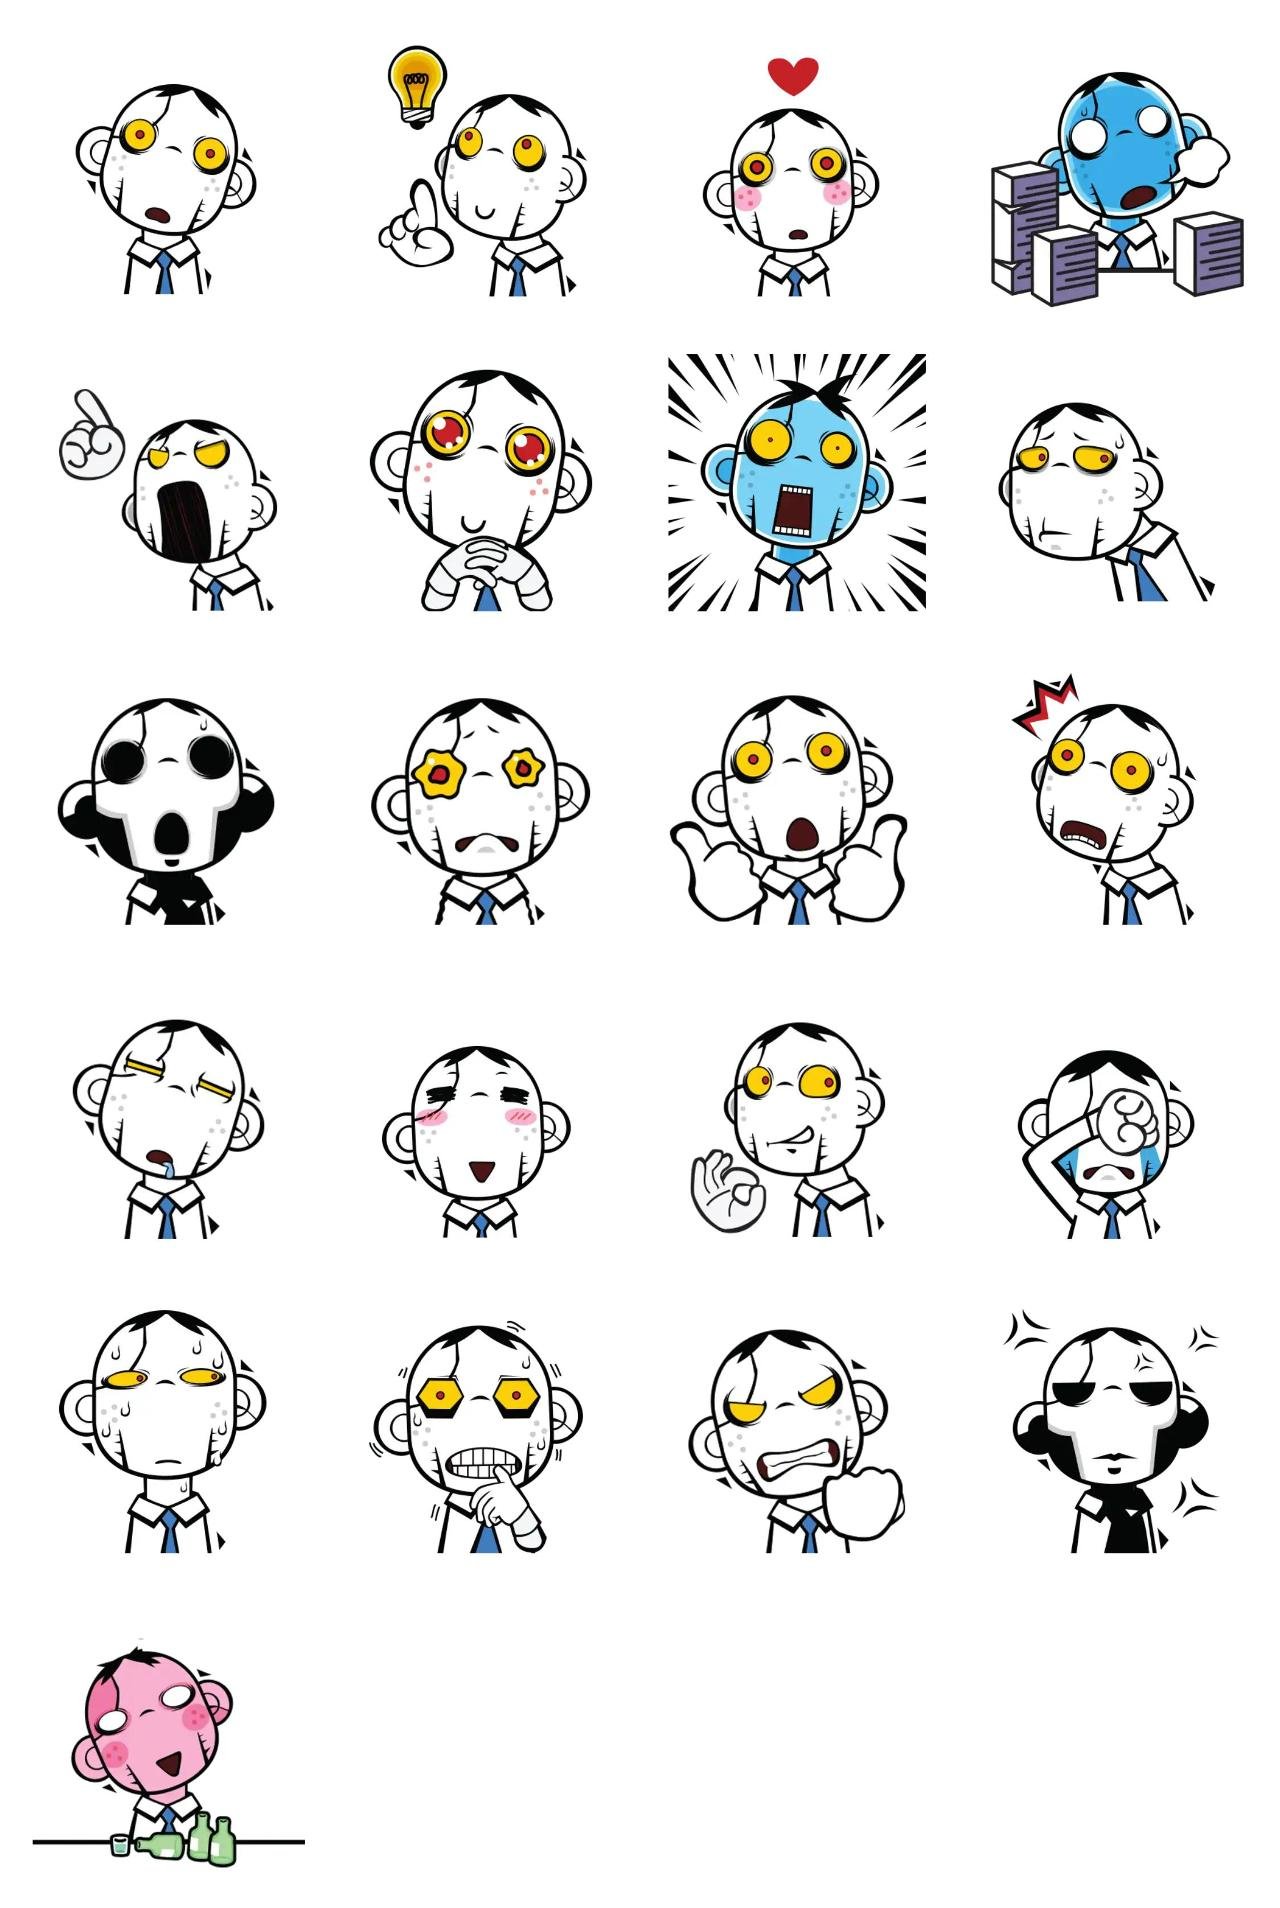 ZB Company 2 Gag,People sticker pack for Whatsapp, Telegram, Signal, and others chatting and message apps